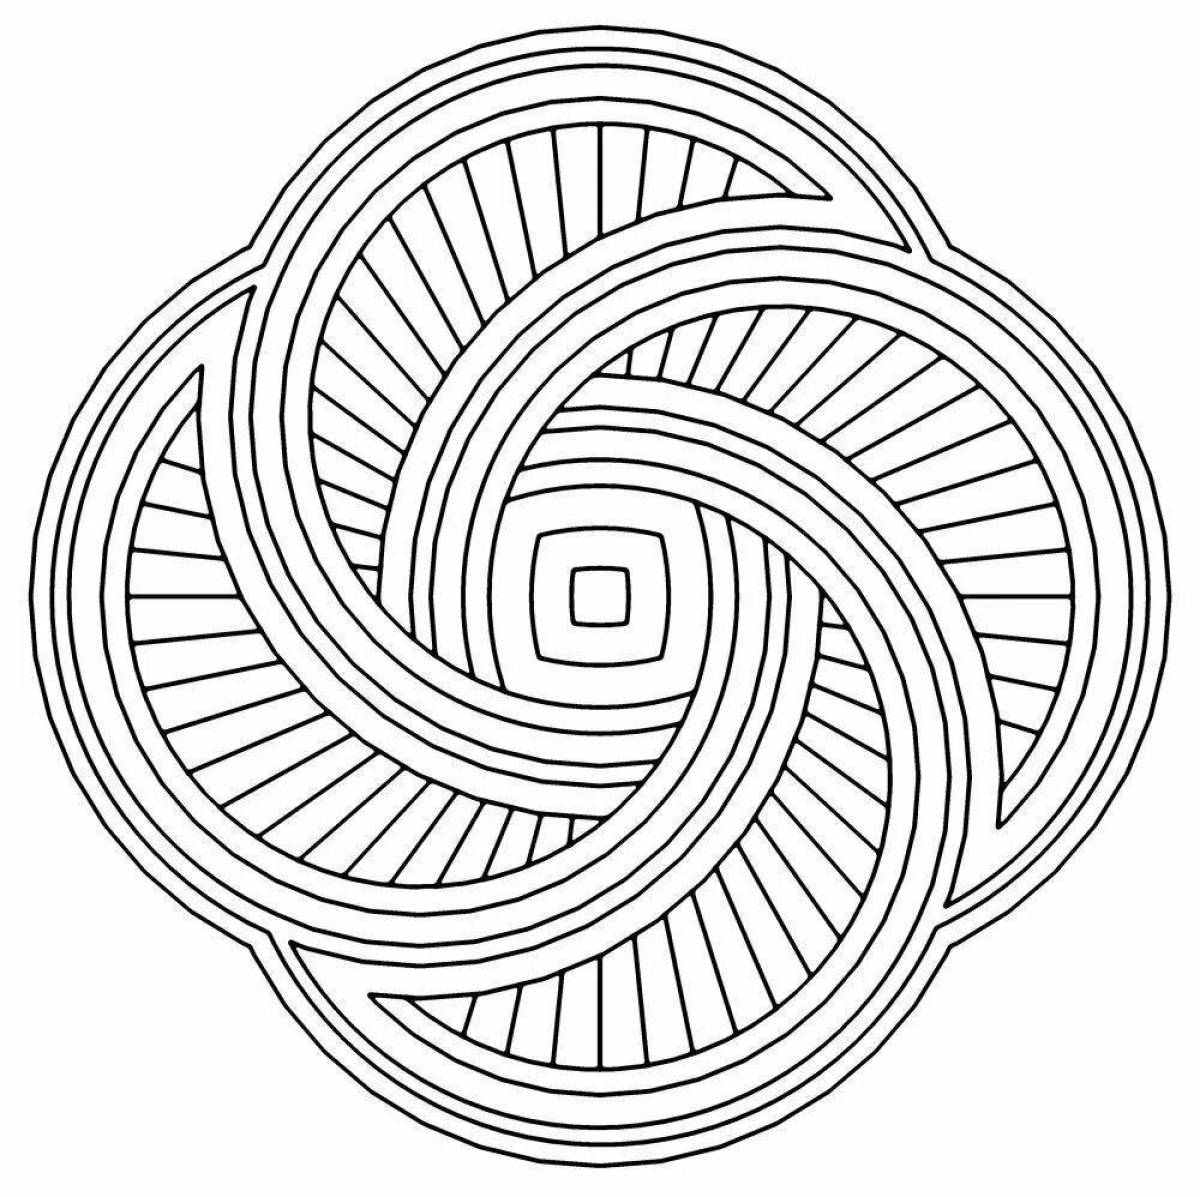 Creatively create your own spiral